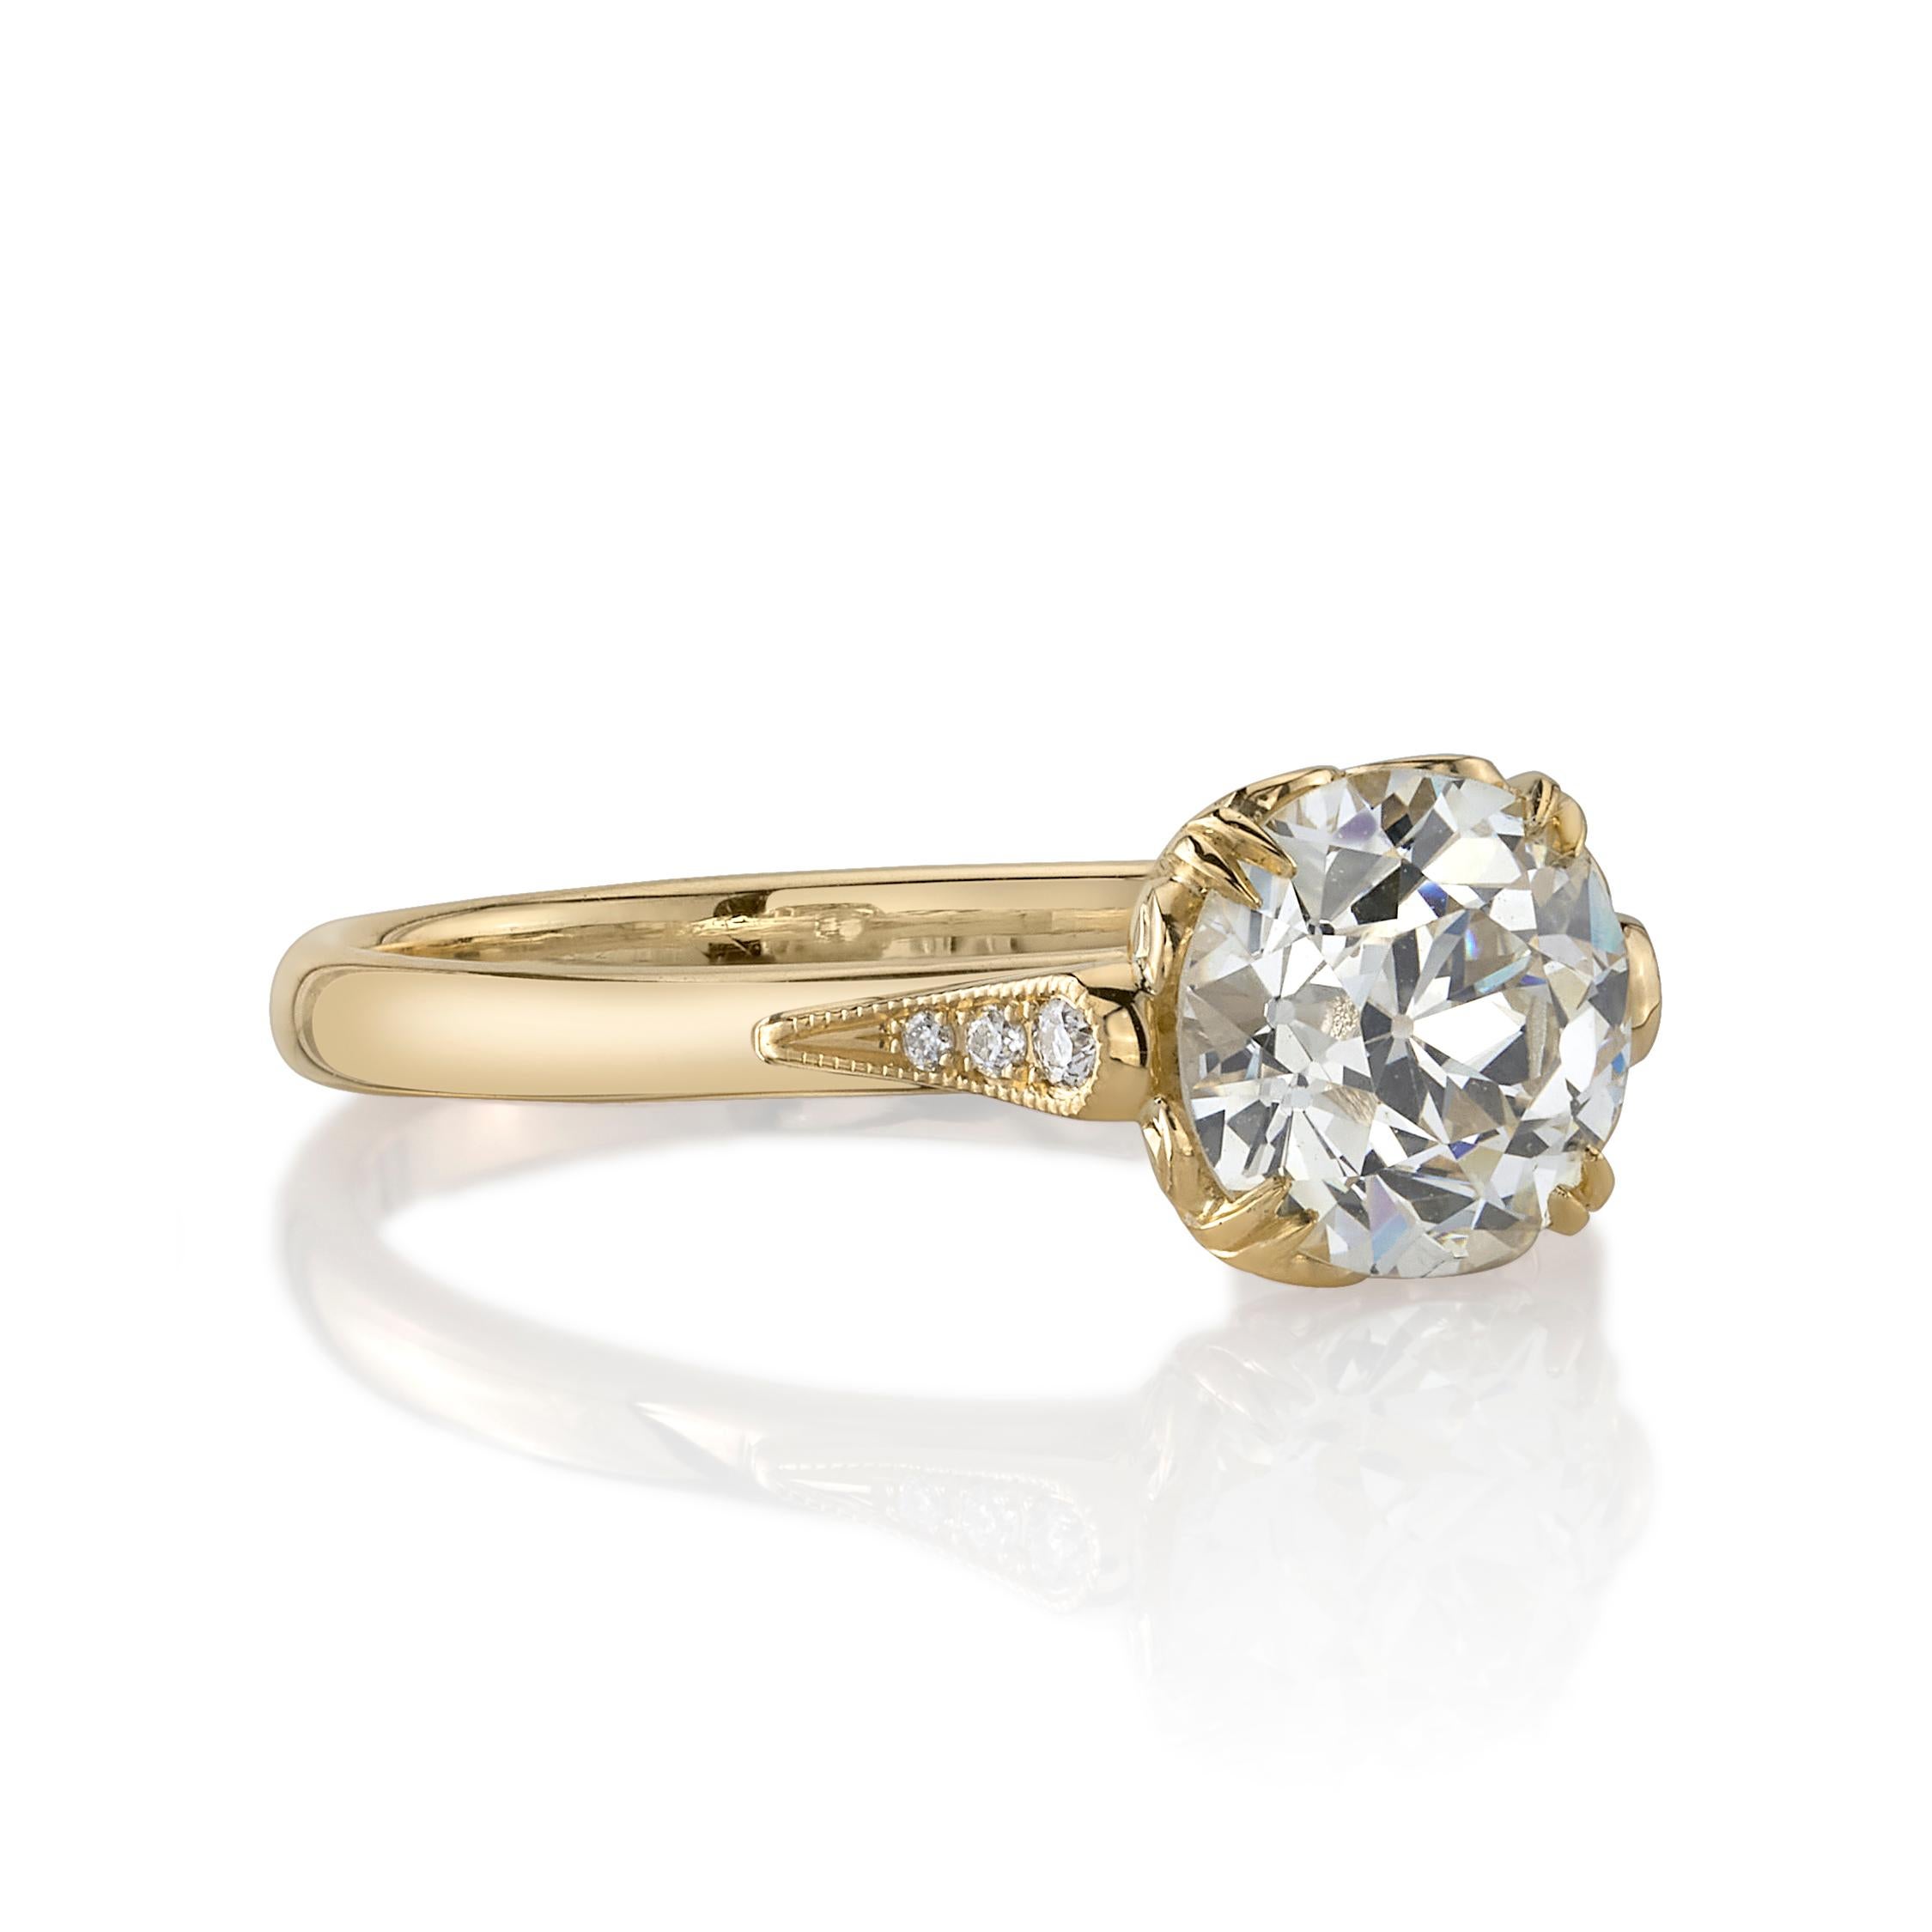 1.26ct N/VS1 GIA certified old European cut diamond with 0.03ctw old European cut accent diamonds set in a handcrafted 18K yellow gold mounting.

Ring is currently a size 6 and can be sized to fit.

Our jewelry is made locally in Los Angeles and